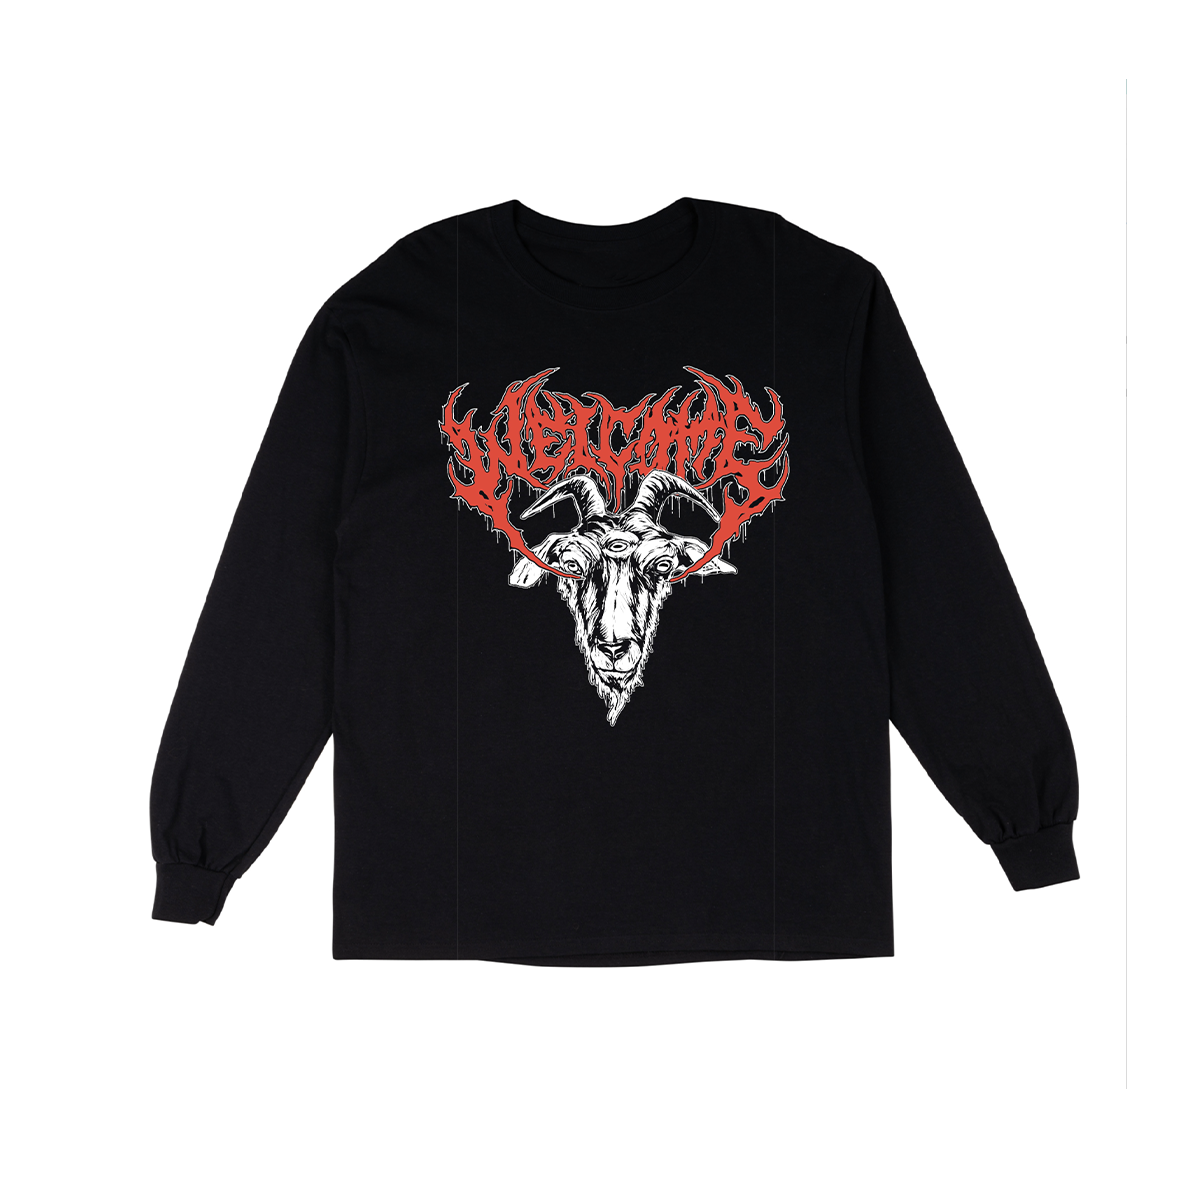 Welcome Pupil Long Sleeve T-Shirt - Black